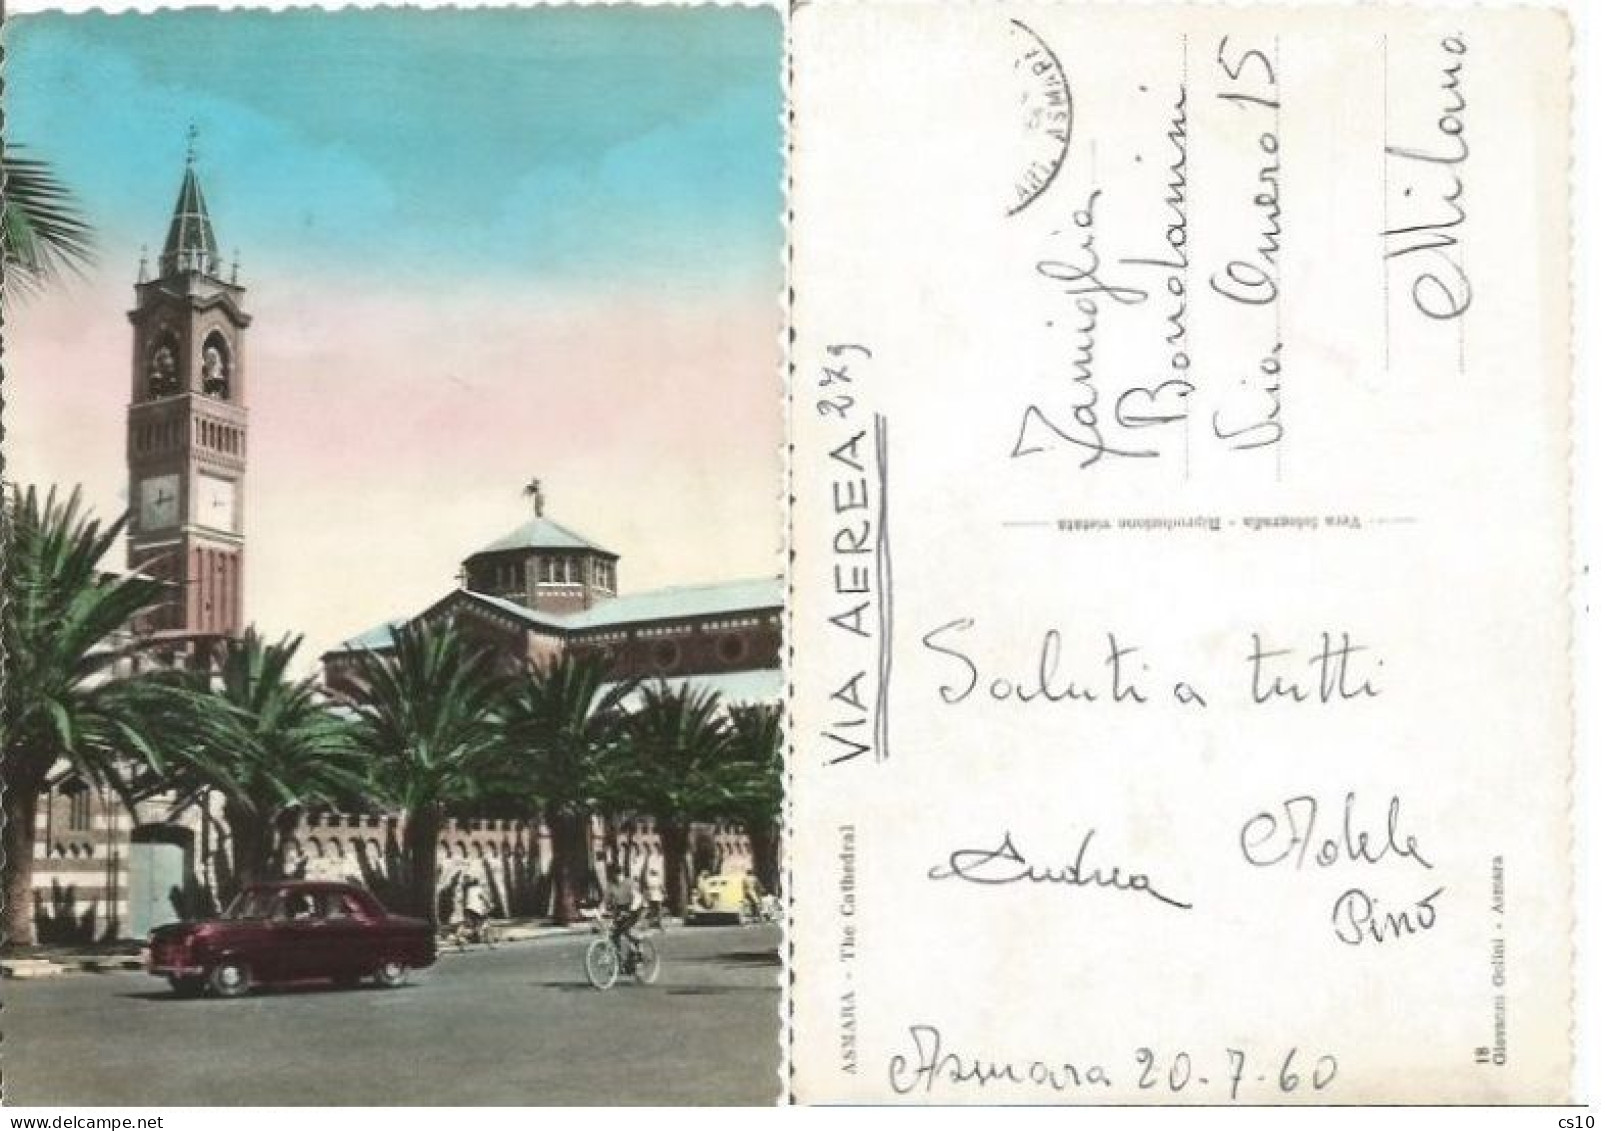 Eritrea (Ethiopia Period) Asmara Cathedral + Cars & Bicycles - Stampless Color Airmail Pcard 20jul1960 To Italy - Äthiopien